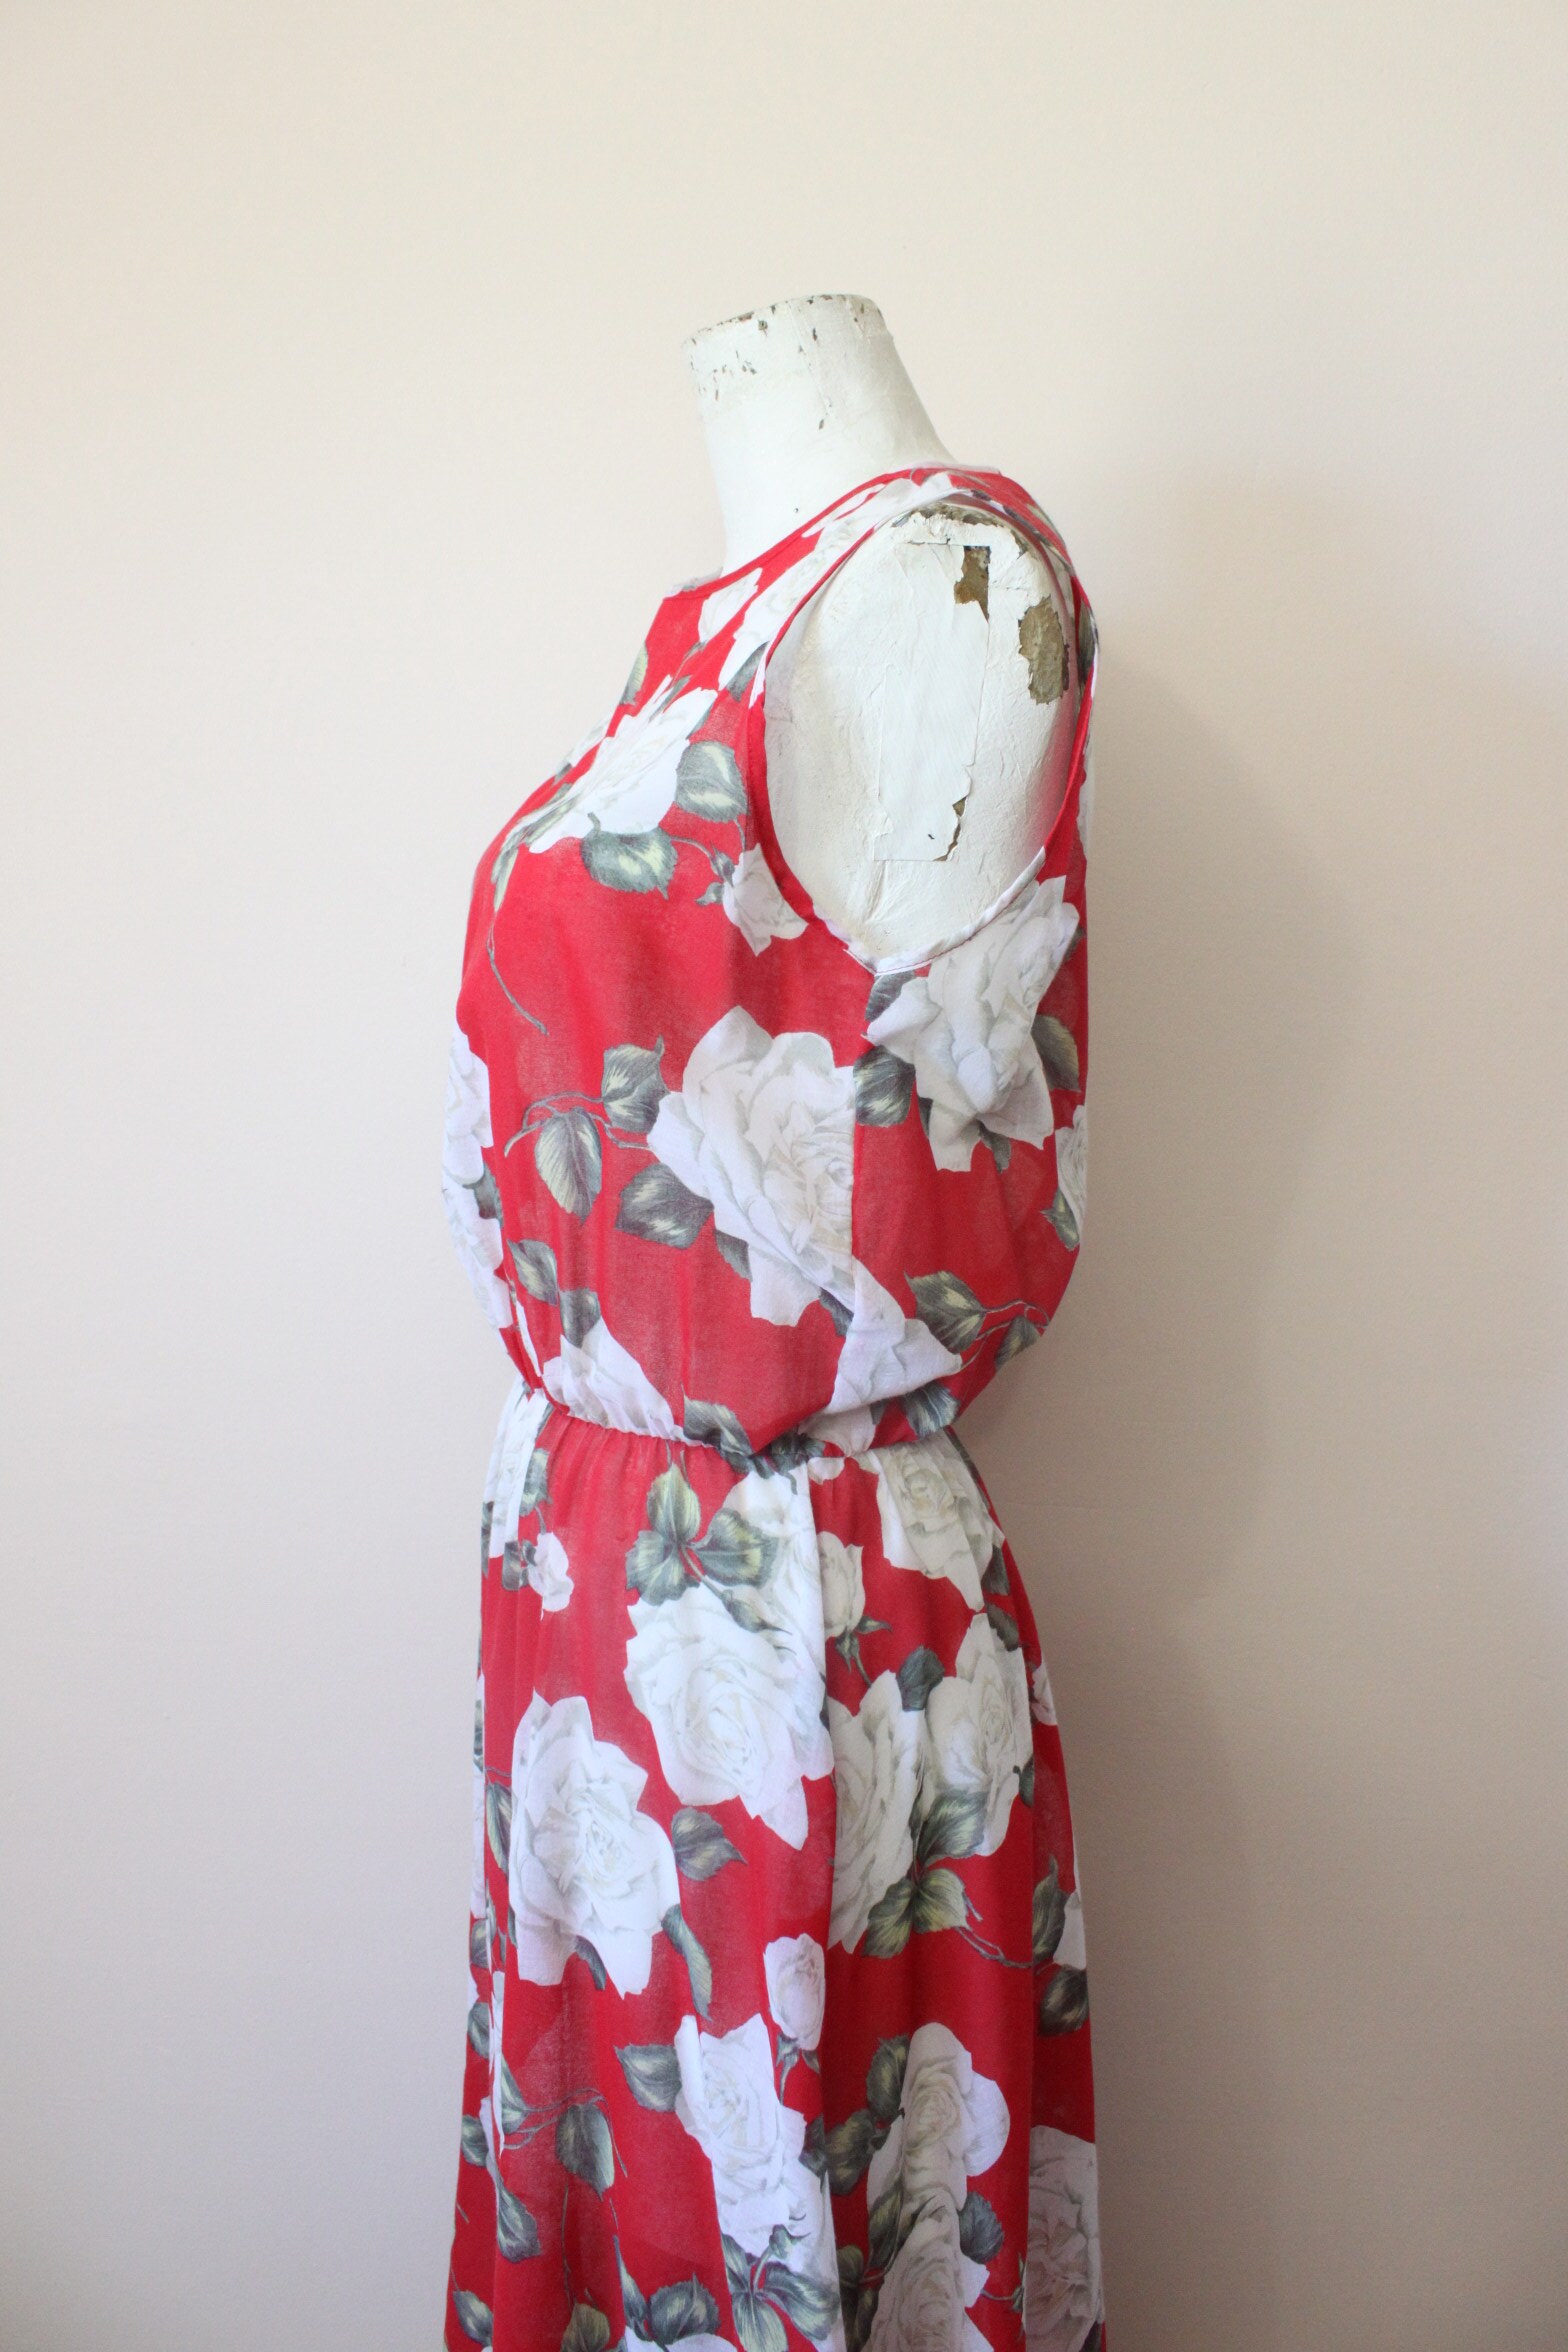 Moon Rose Sheer Red Dress 1980s Sheer Red Bold Floral Cotton Blend ...